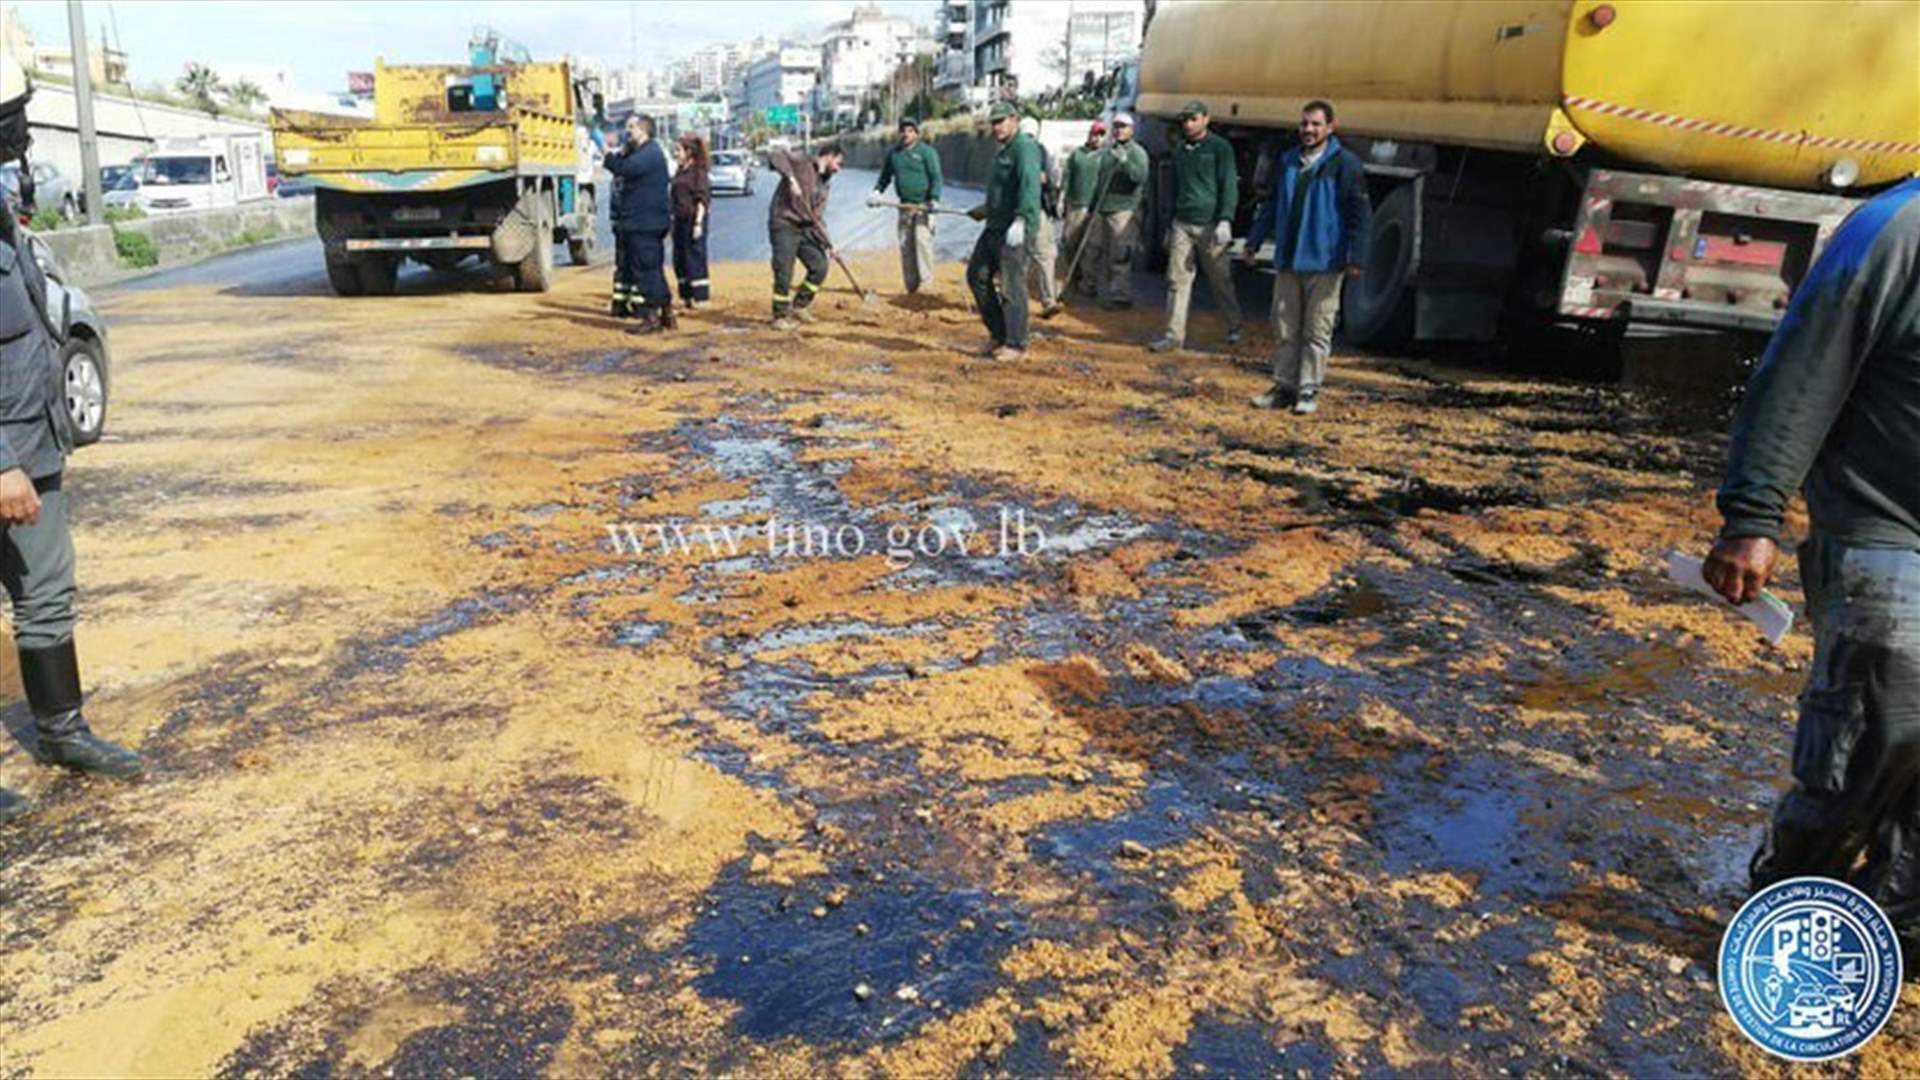 Dbayeh highway (east side) closed due to oil spill, traffic redirected to seaside road